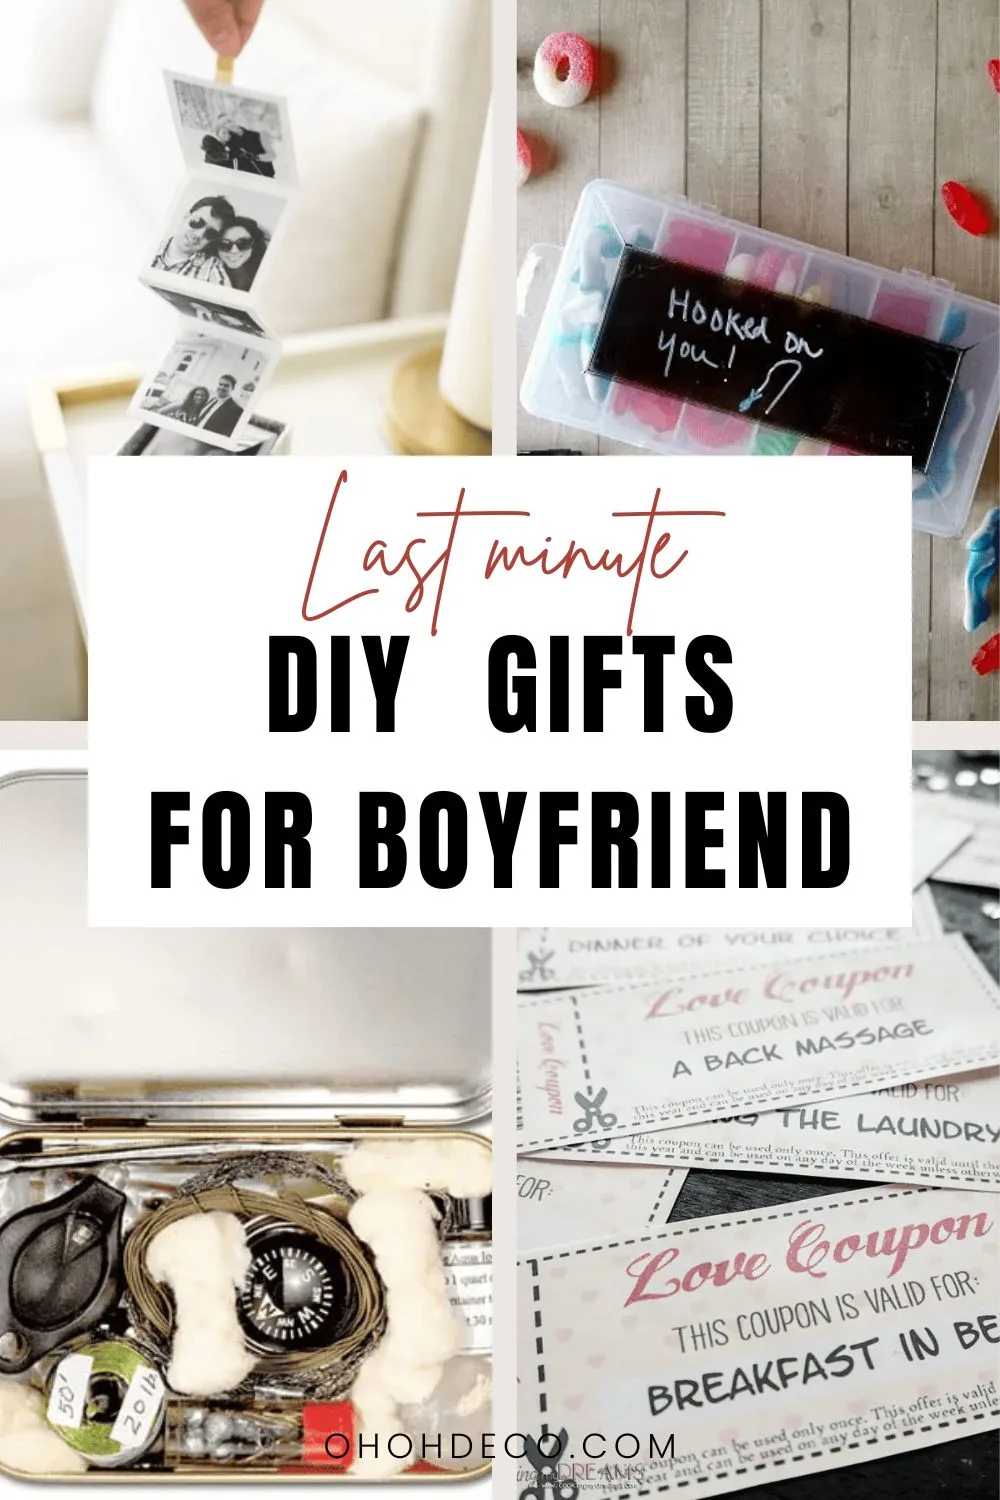 37 Best Anniversary Gifts for Him - The Unique Husband Gift Guide